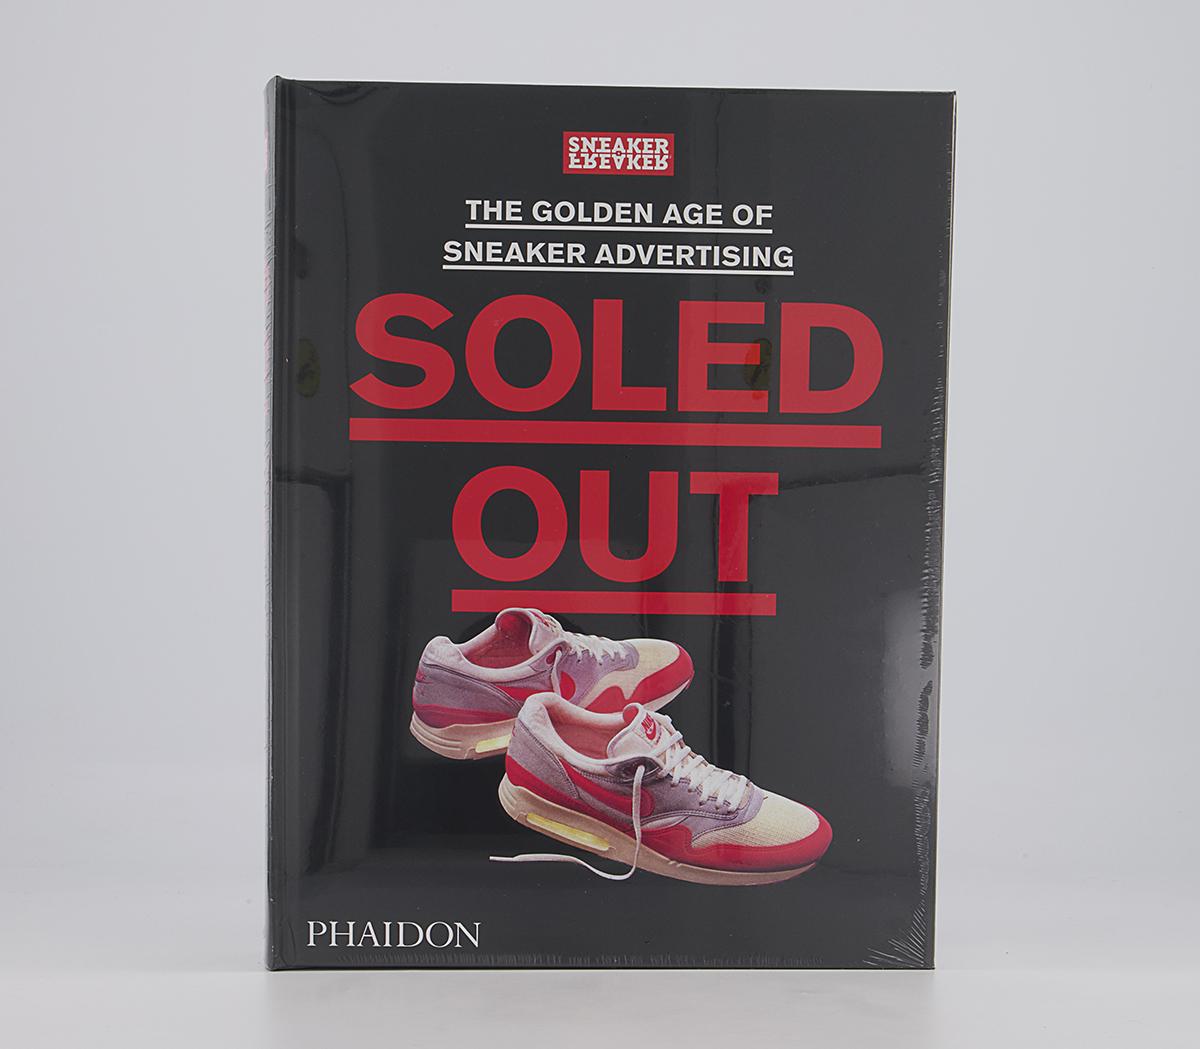 PhaidonSneaker Freaker: Soled OutSoled Out